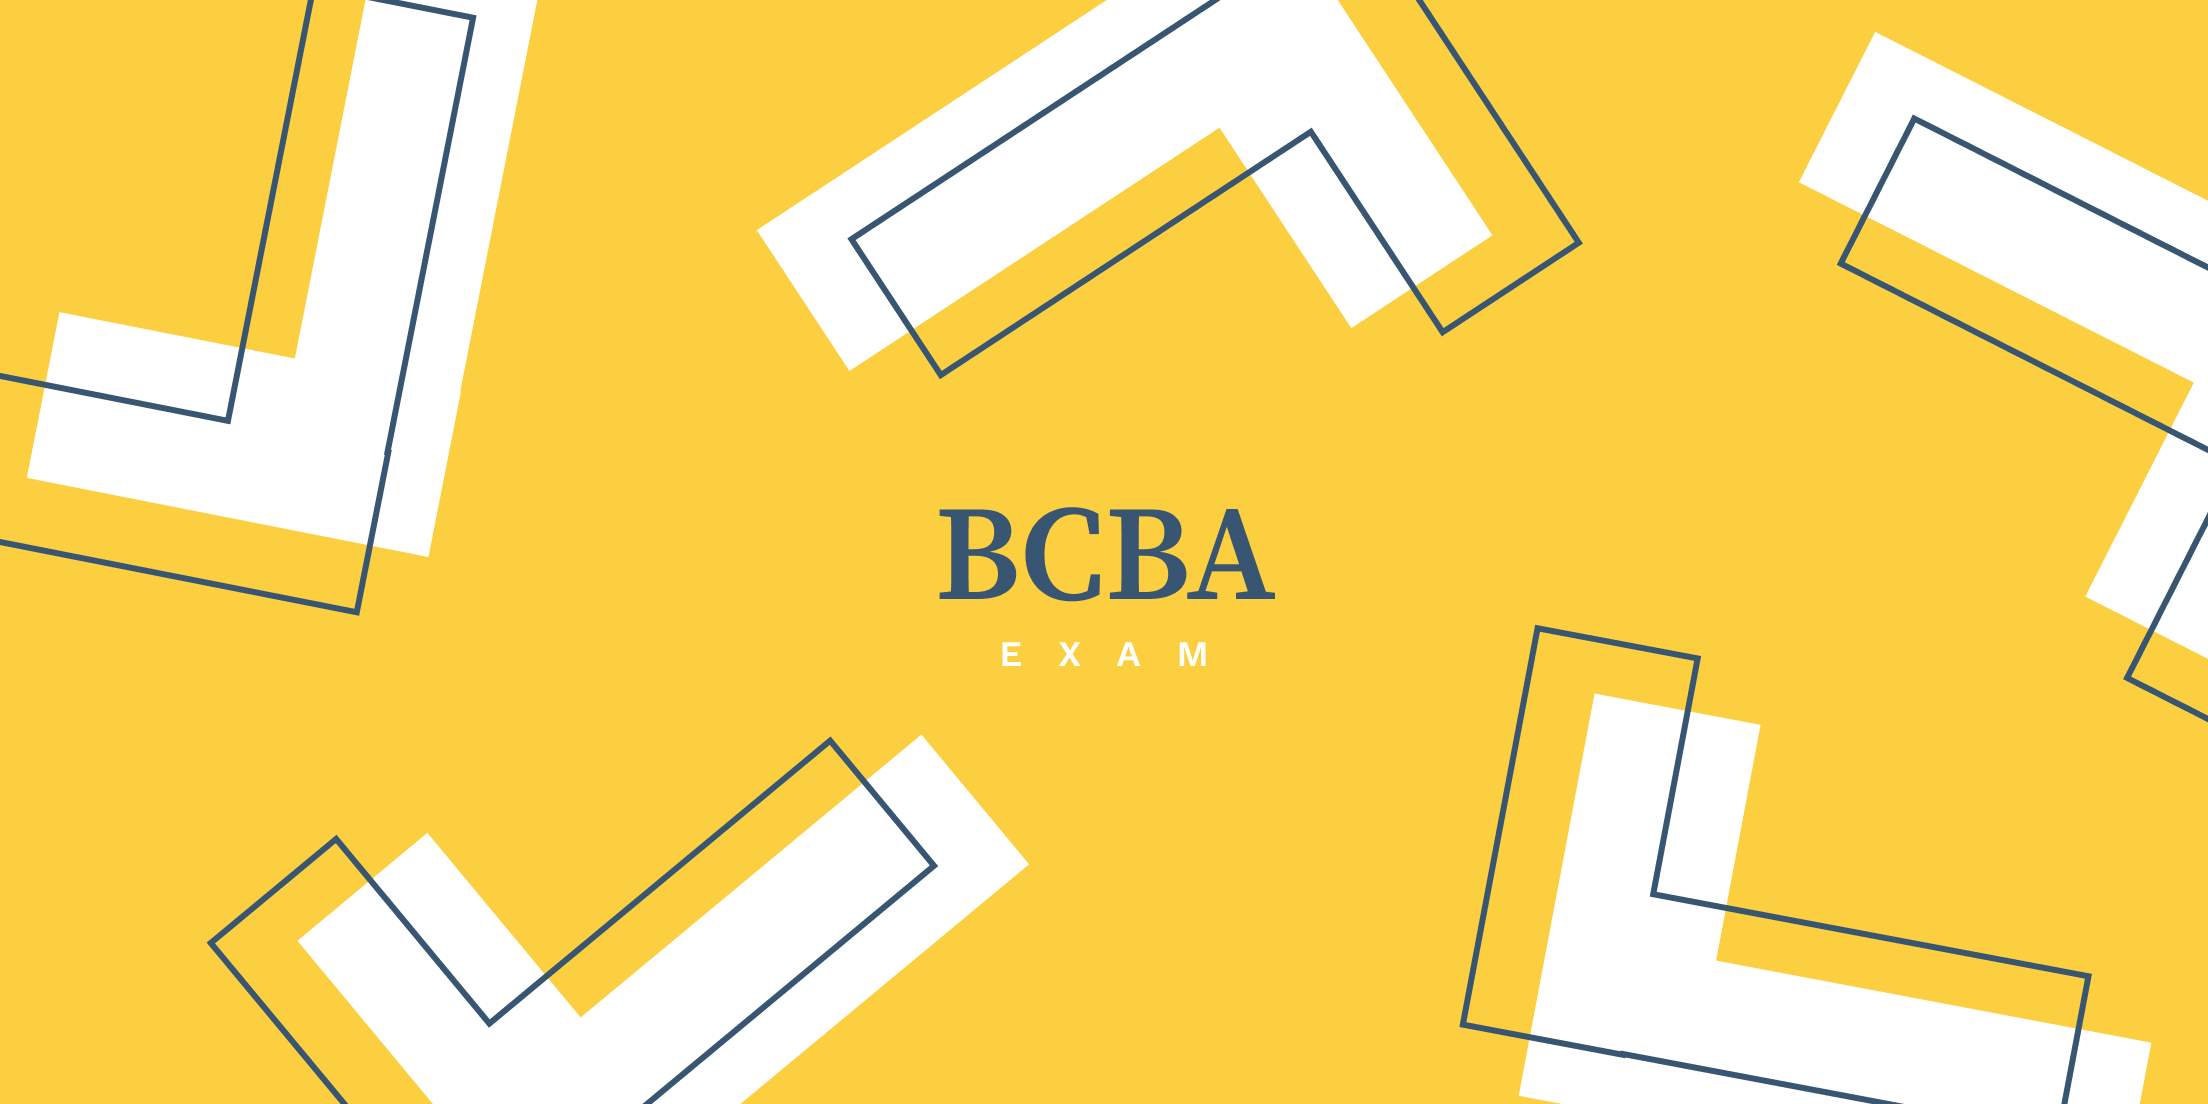 How to Pass the BCBA Exam: Tips, Preparation & More